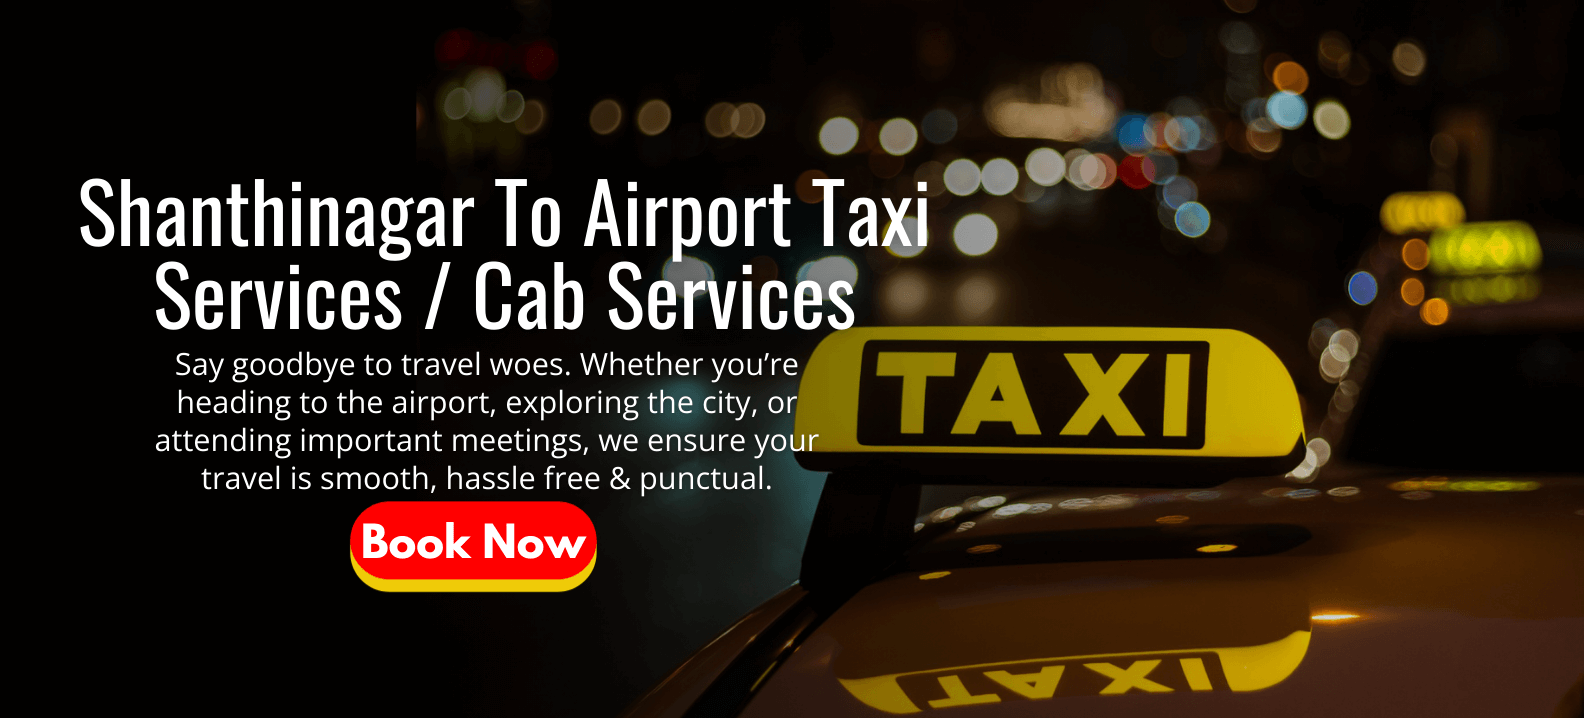 Shanthinagar to Airport Taxi Services | Cab Services